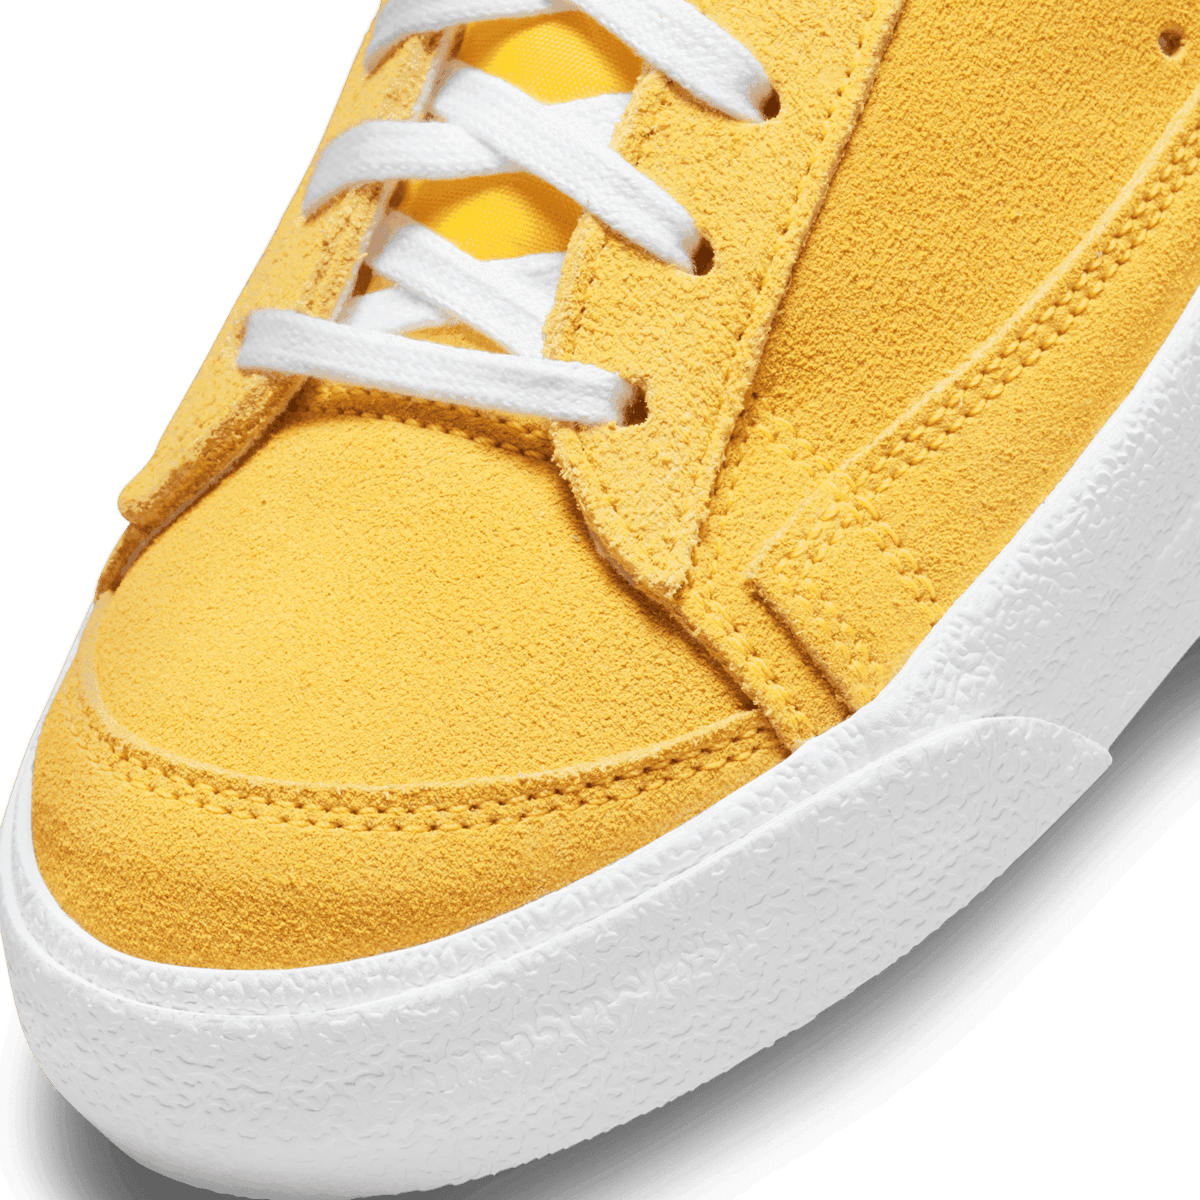 Nike Blazer Low '77 Shoes in Yellow Angle 4